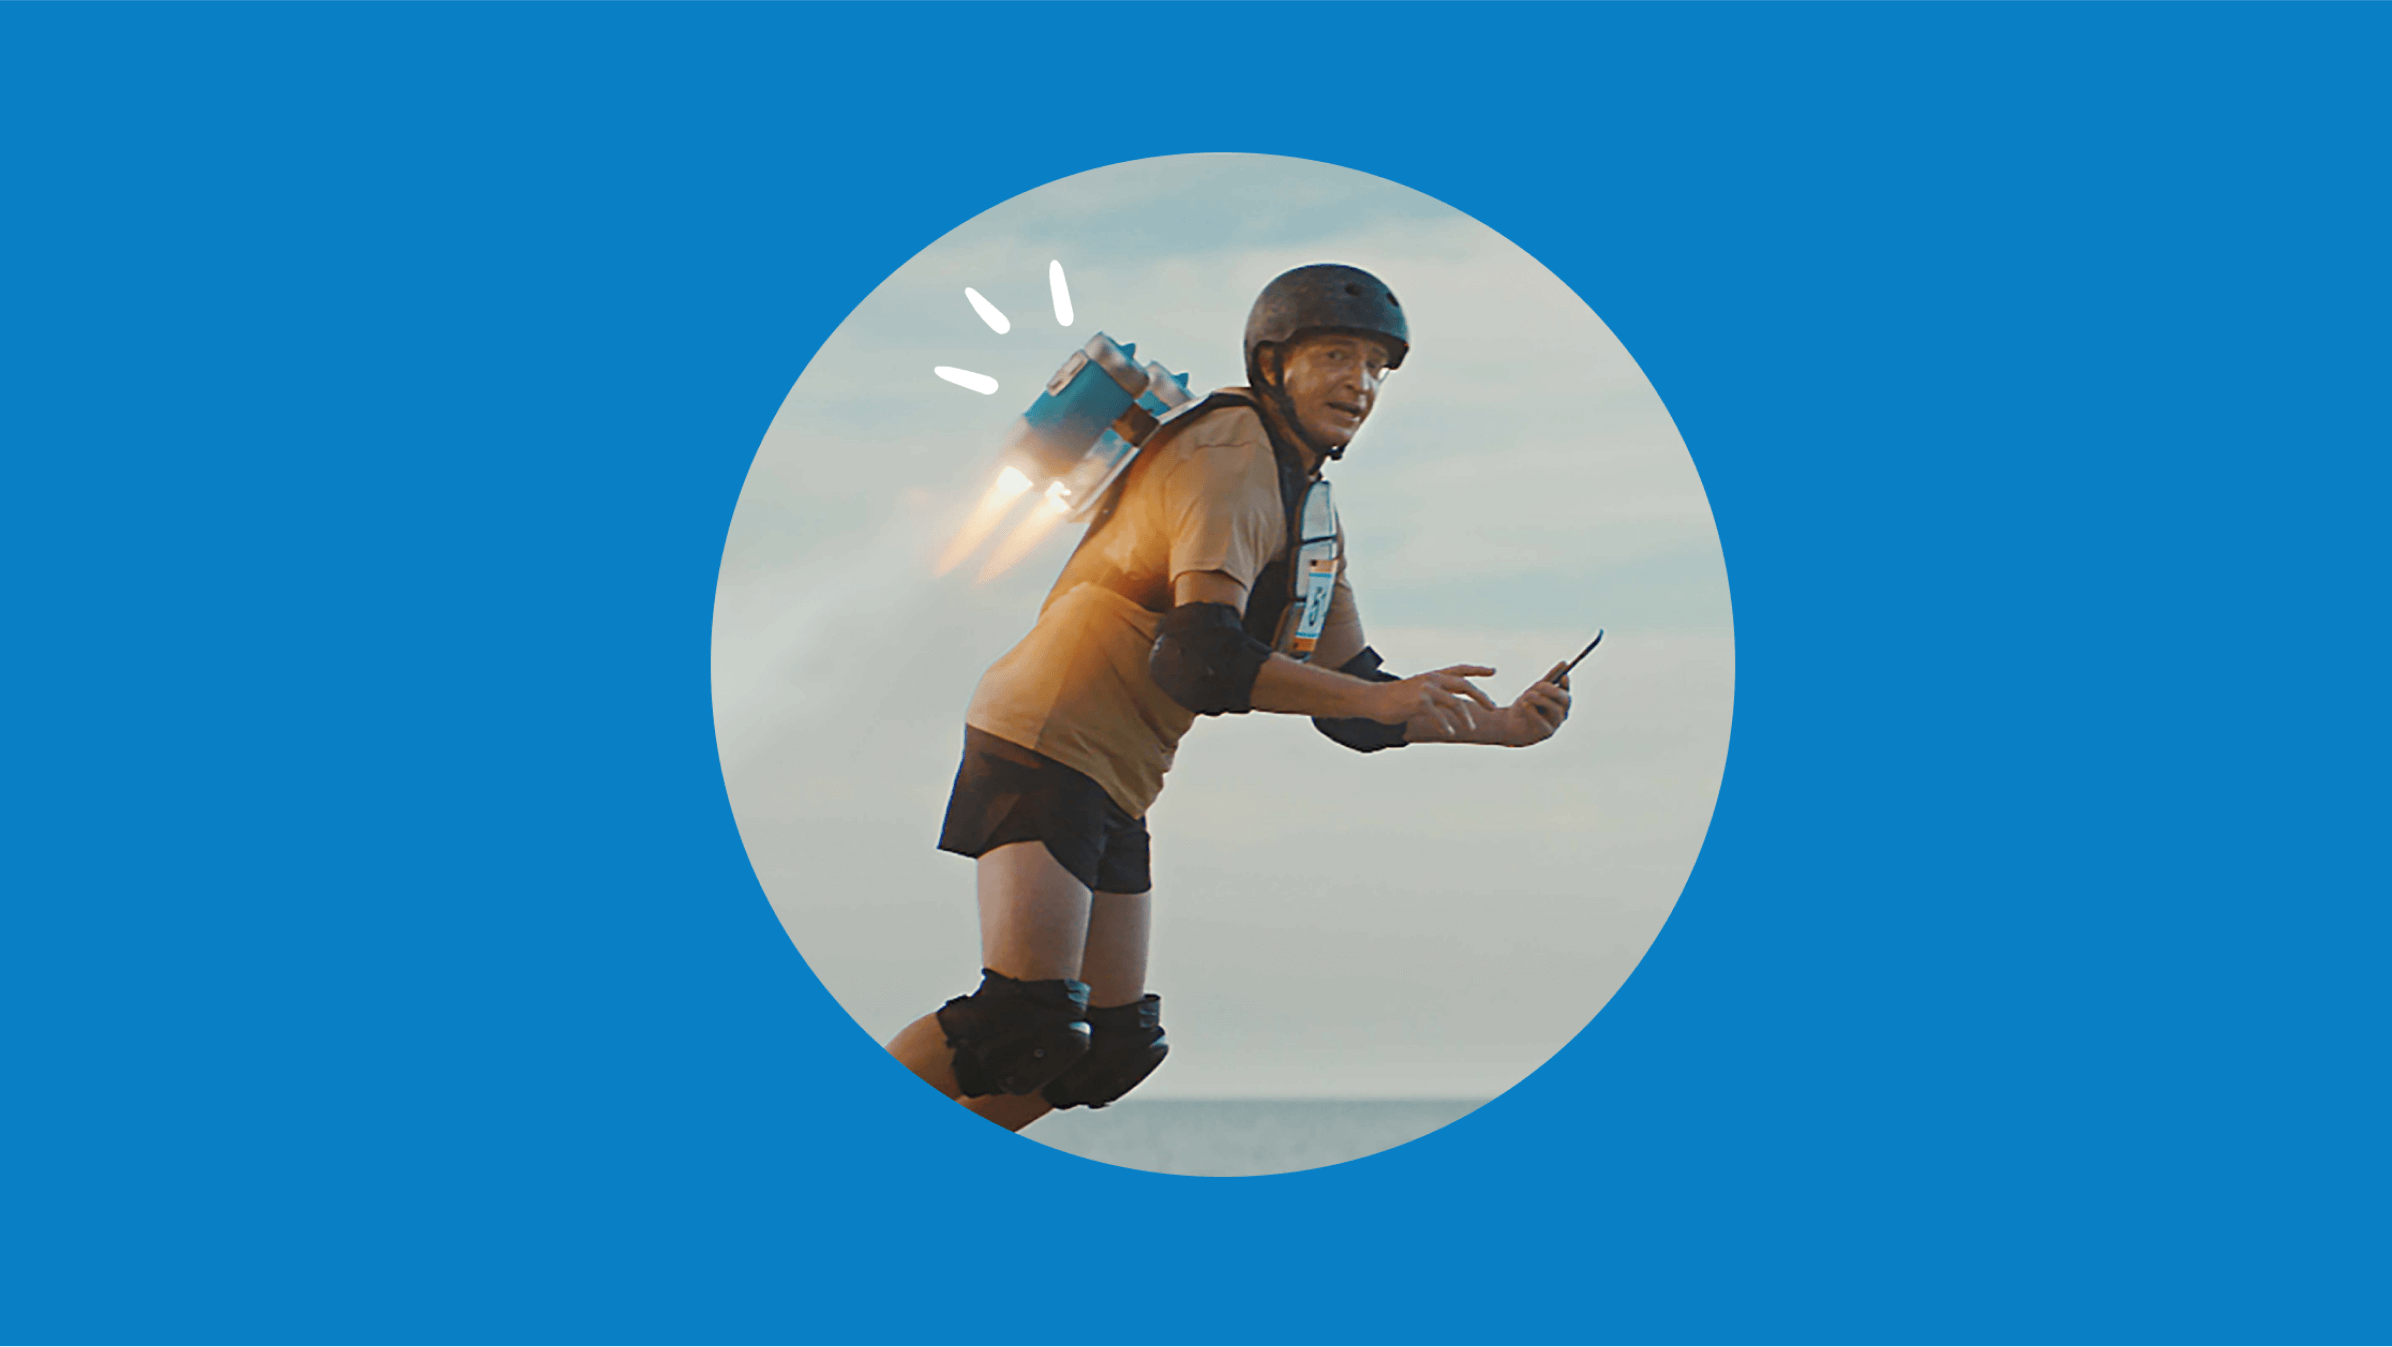 A person with a rocket booster strapped to their back holds a smartphone, showing the efficiency boost with a switch to Xero.